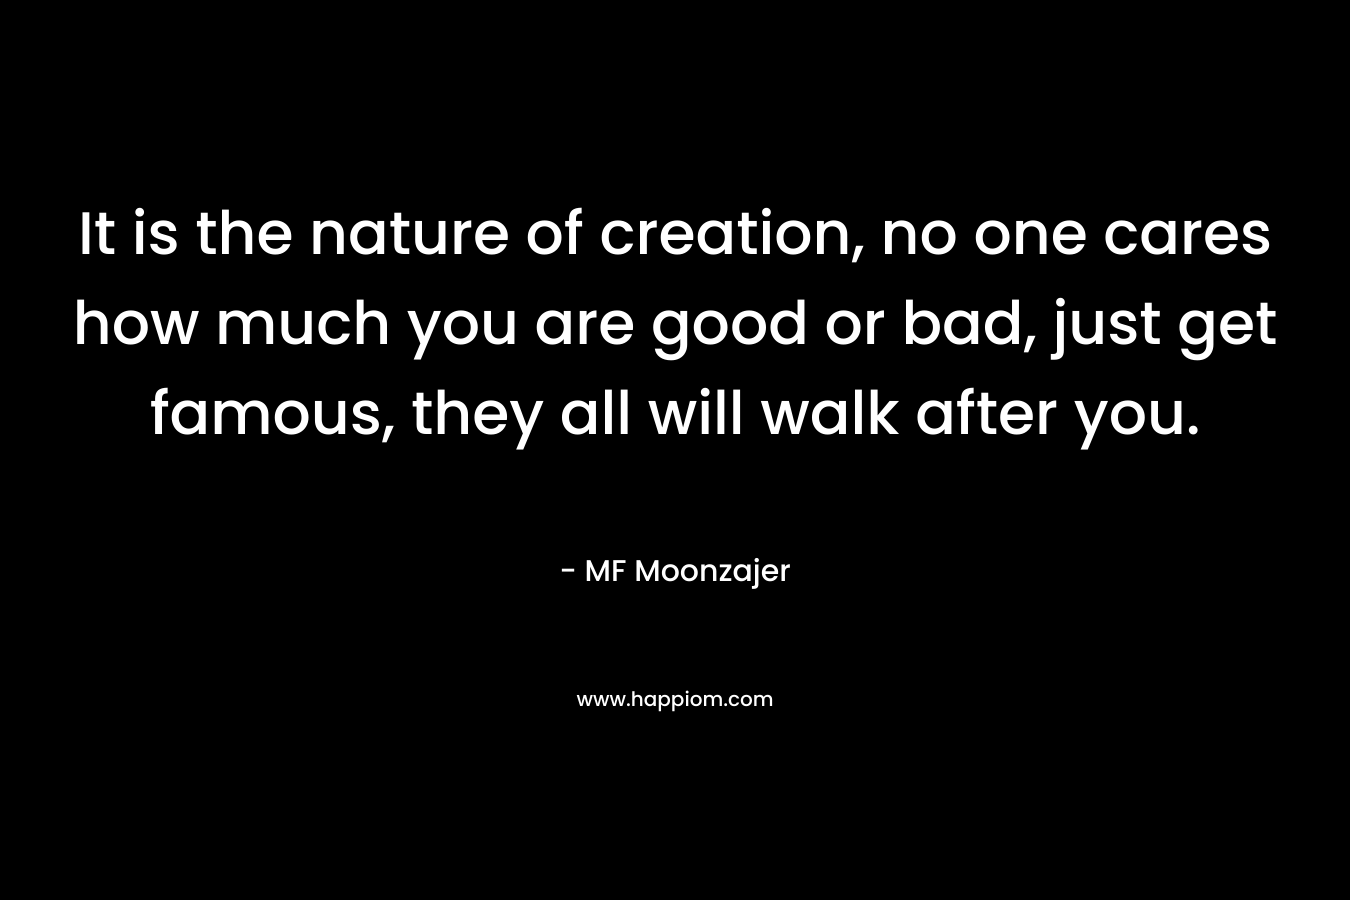 It is the nature of creation, no one cares how much you are good or bad, just get famous, they all will walk after you. – MF Moonzajer